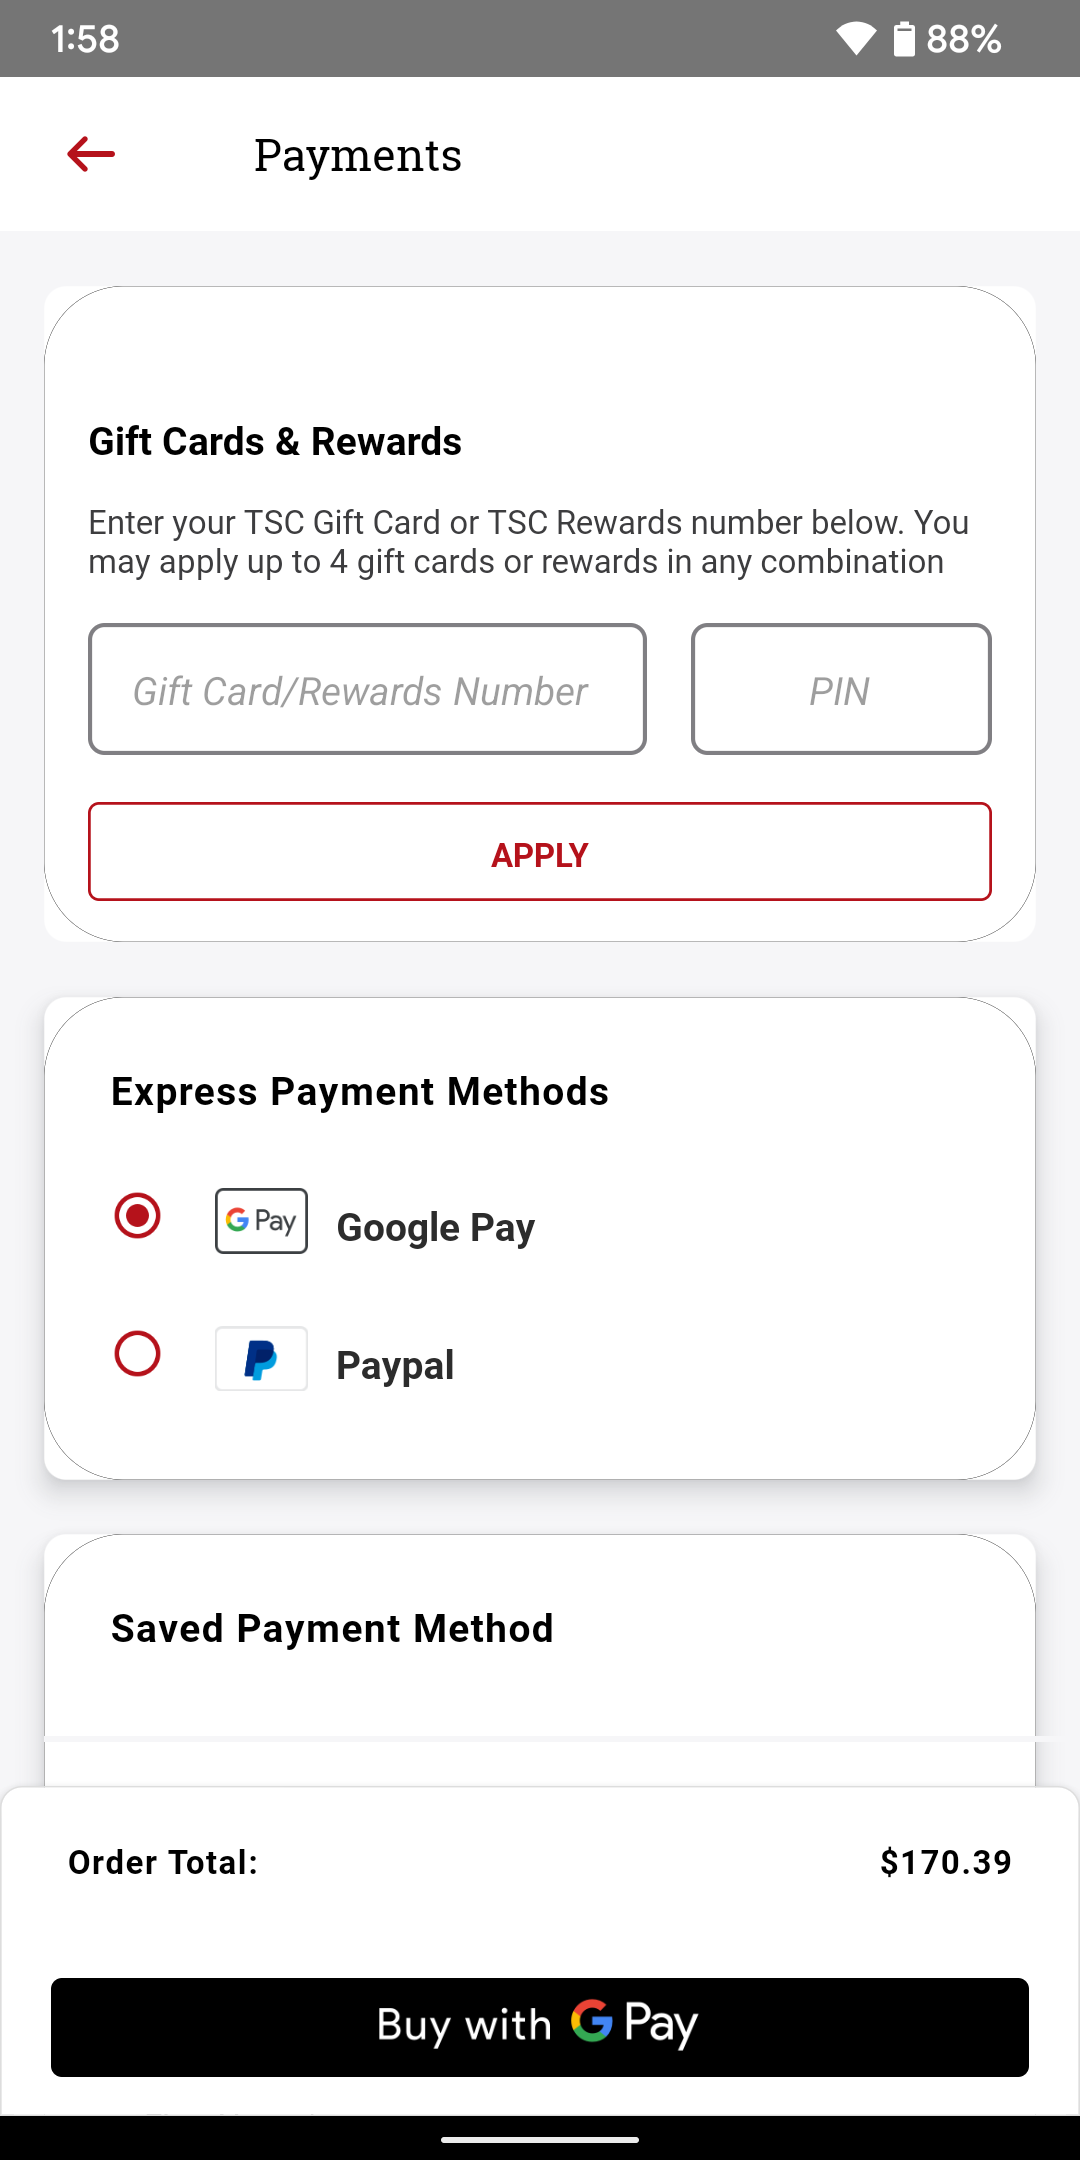 Tractor Supply Company accepts Google Pay in its app.